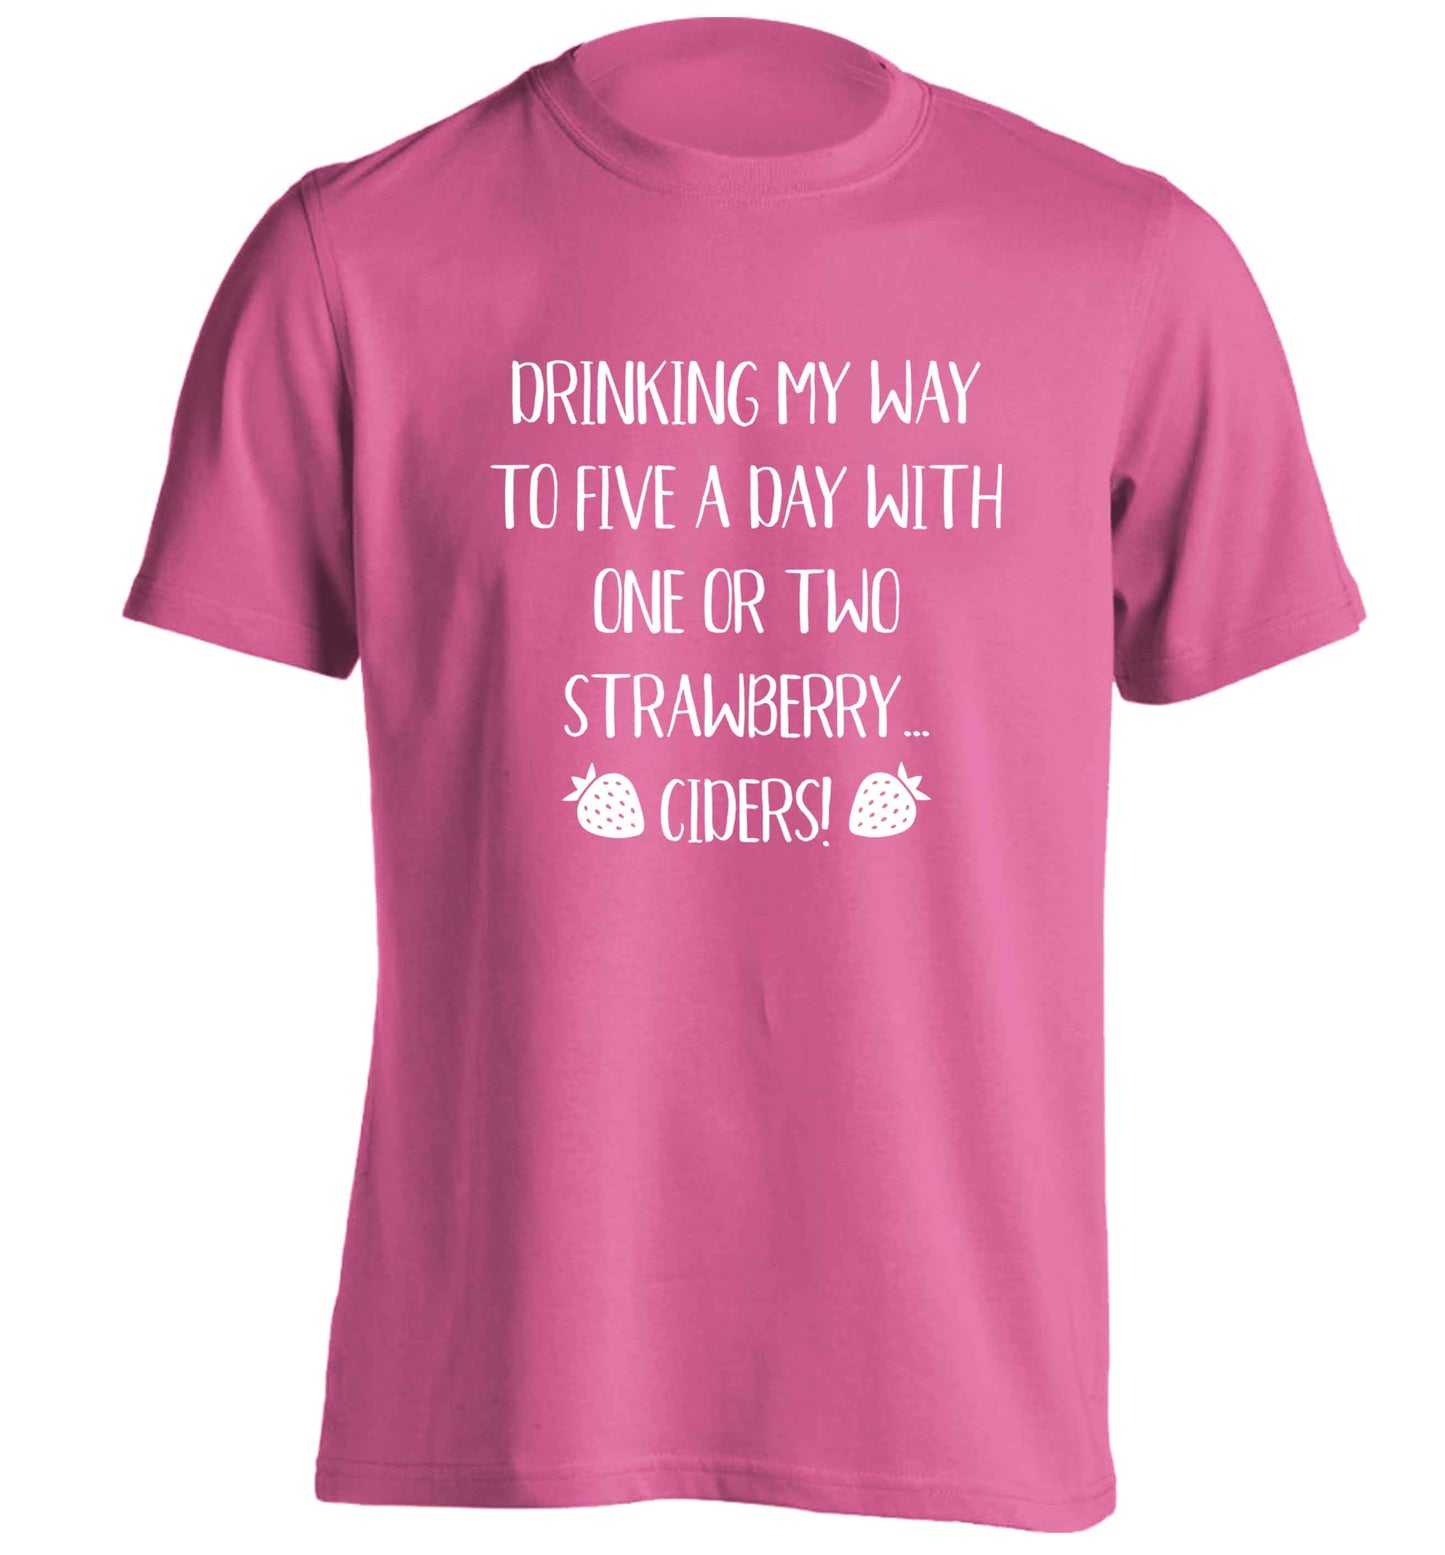 Drinking my way to five a day with one or two strawberry ciders adults unisex pink Tshirt 2XL